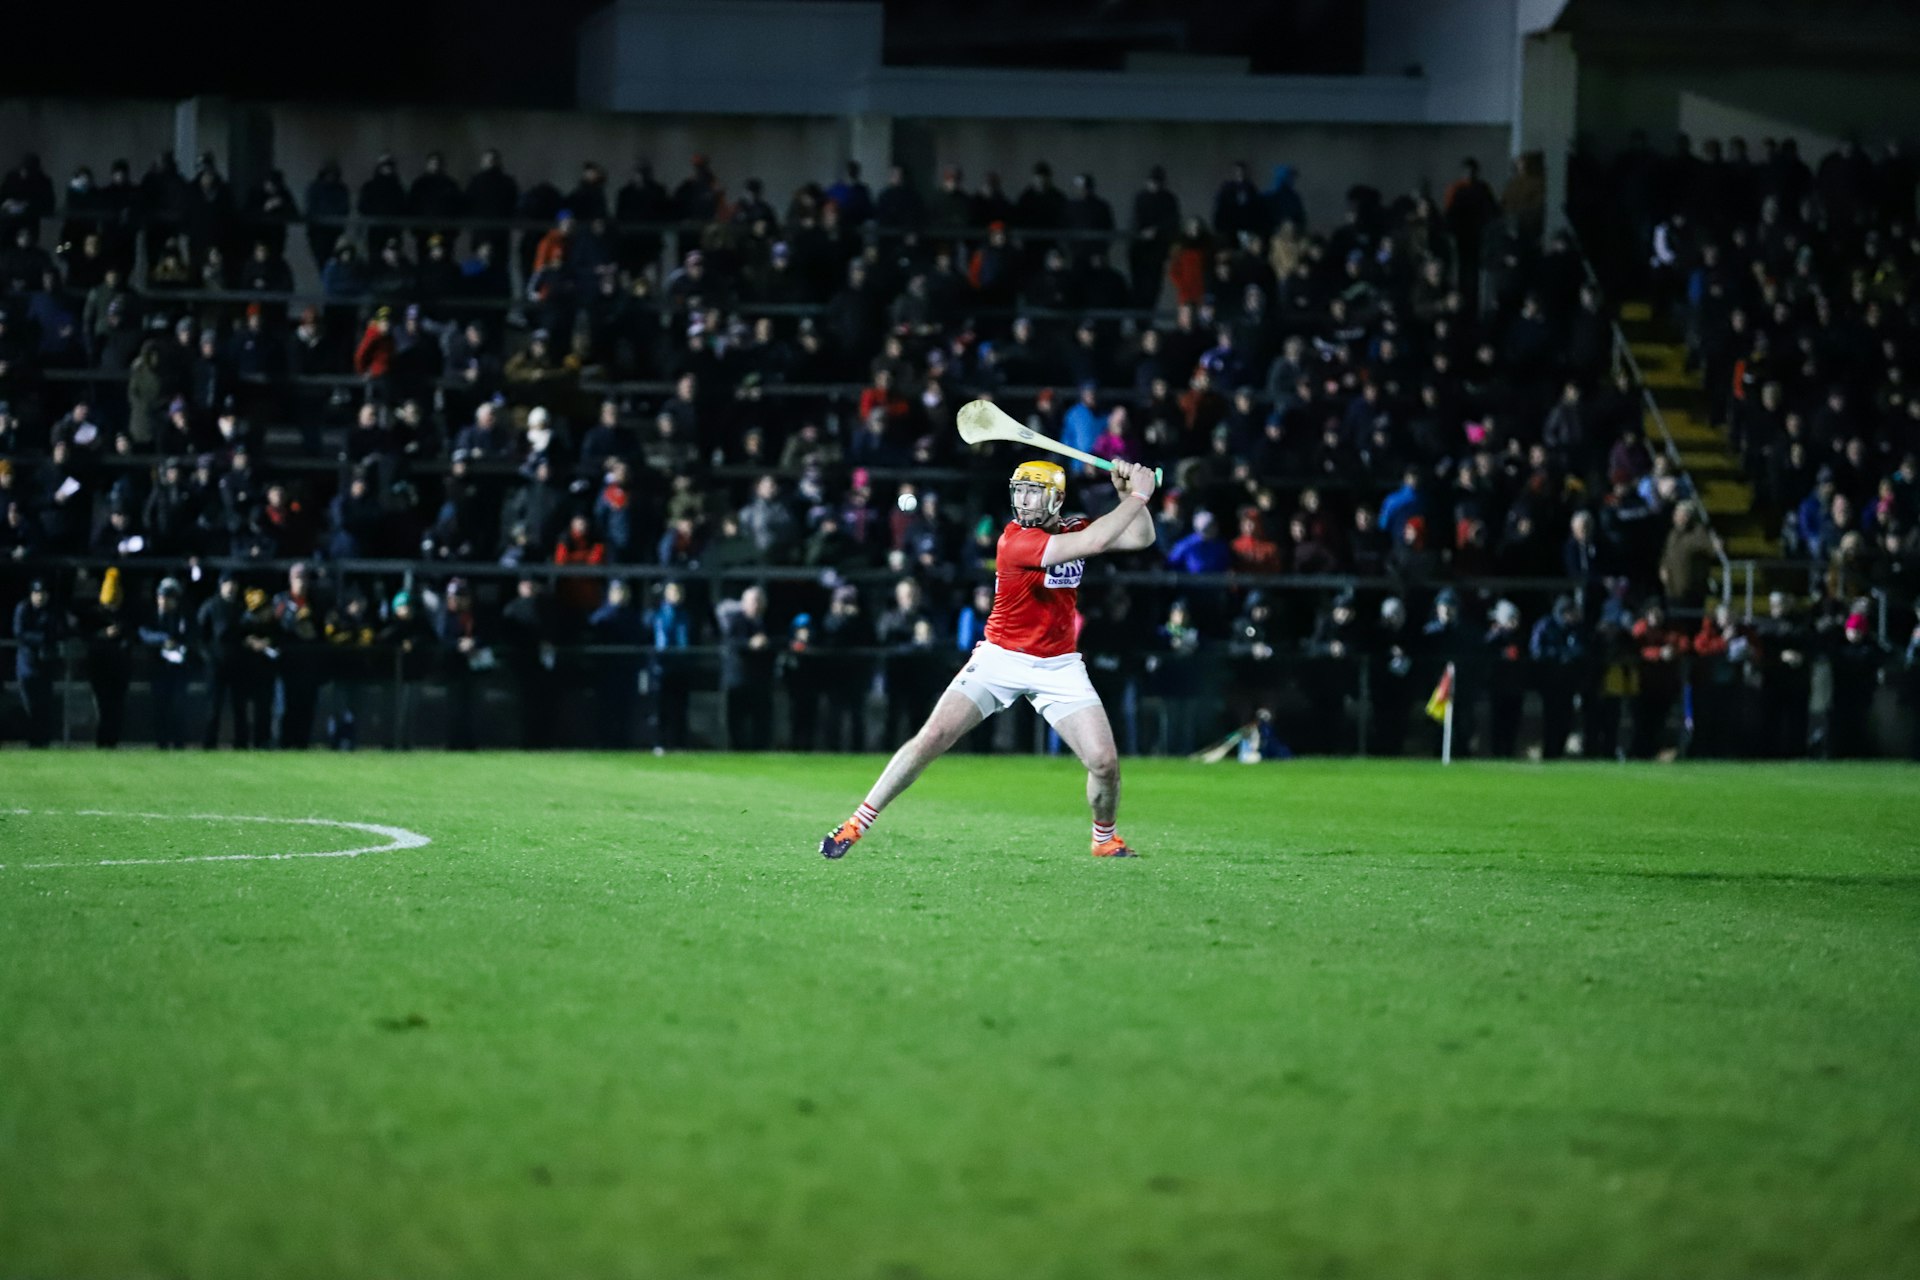 A hurling player in red prepares to hit the sliotar in front of the blurred crowd at Mallow GAA Sports Complex in Irleand